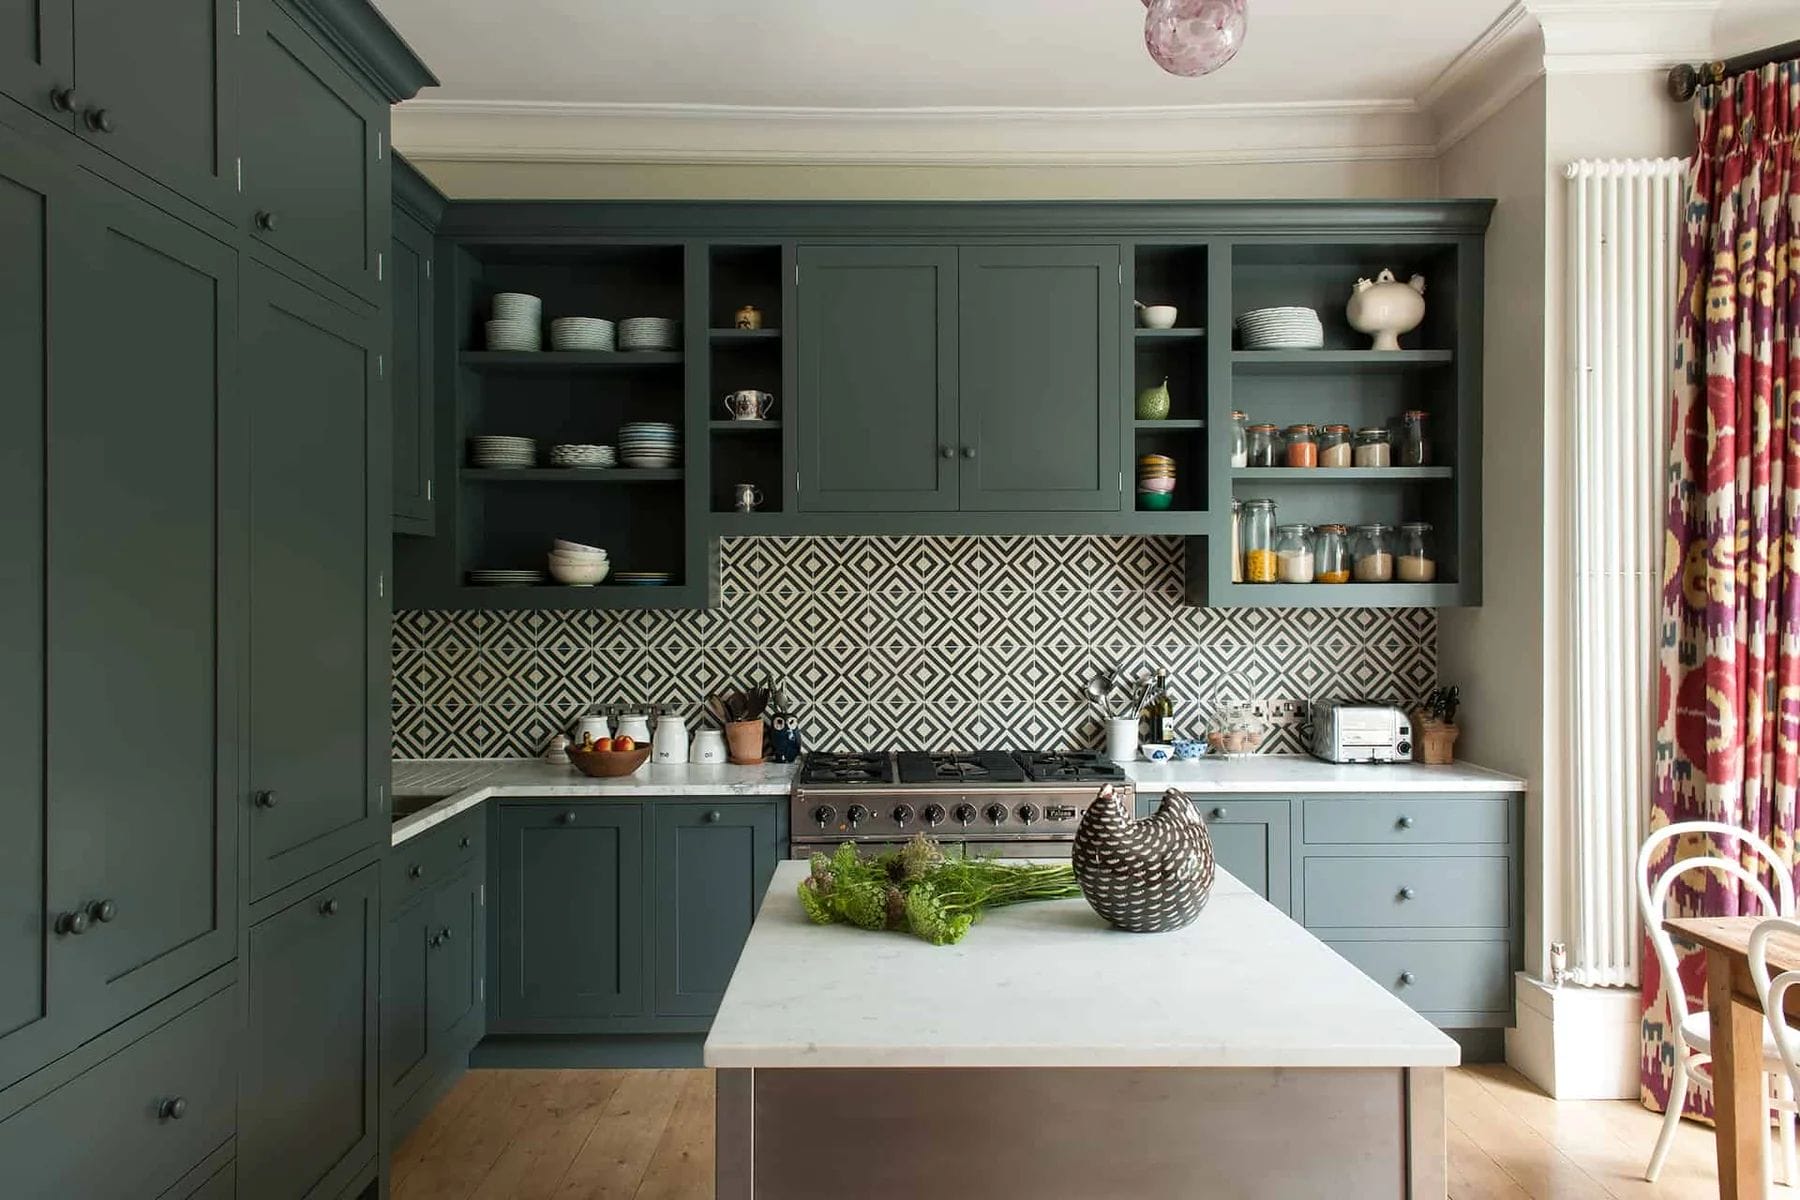 Kitchen design by Flora Soames in world of interiors